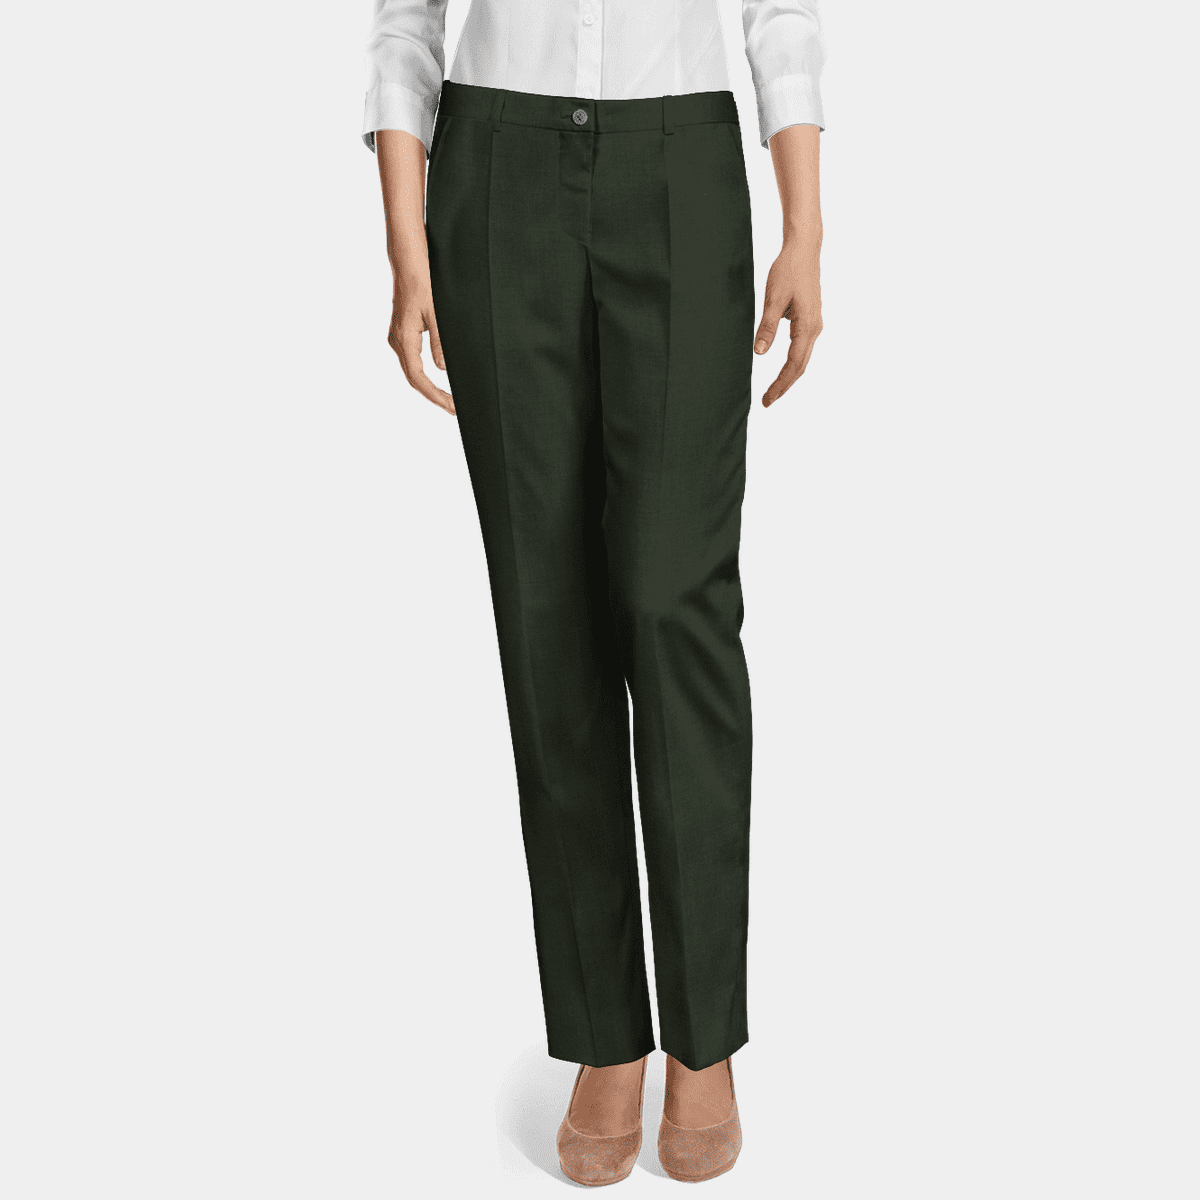 Green Lamb Ladies Stretch Pull-On 7/8 Trouser in Navy Blue - Size